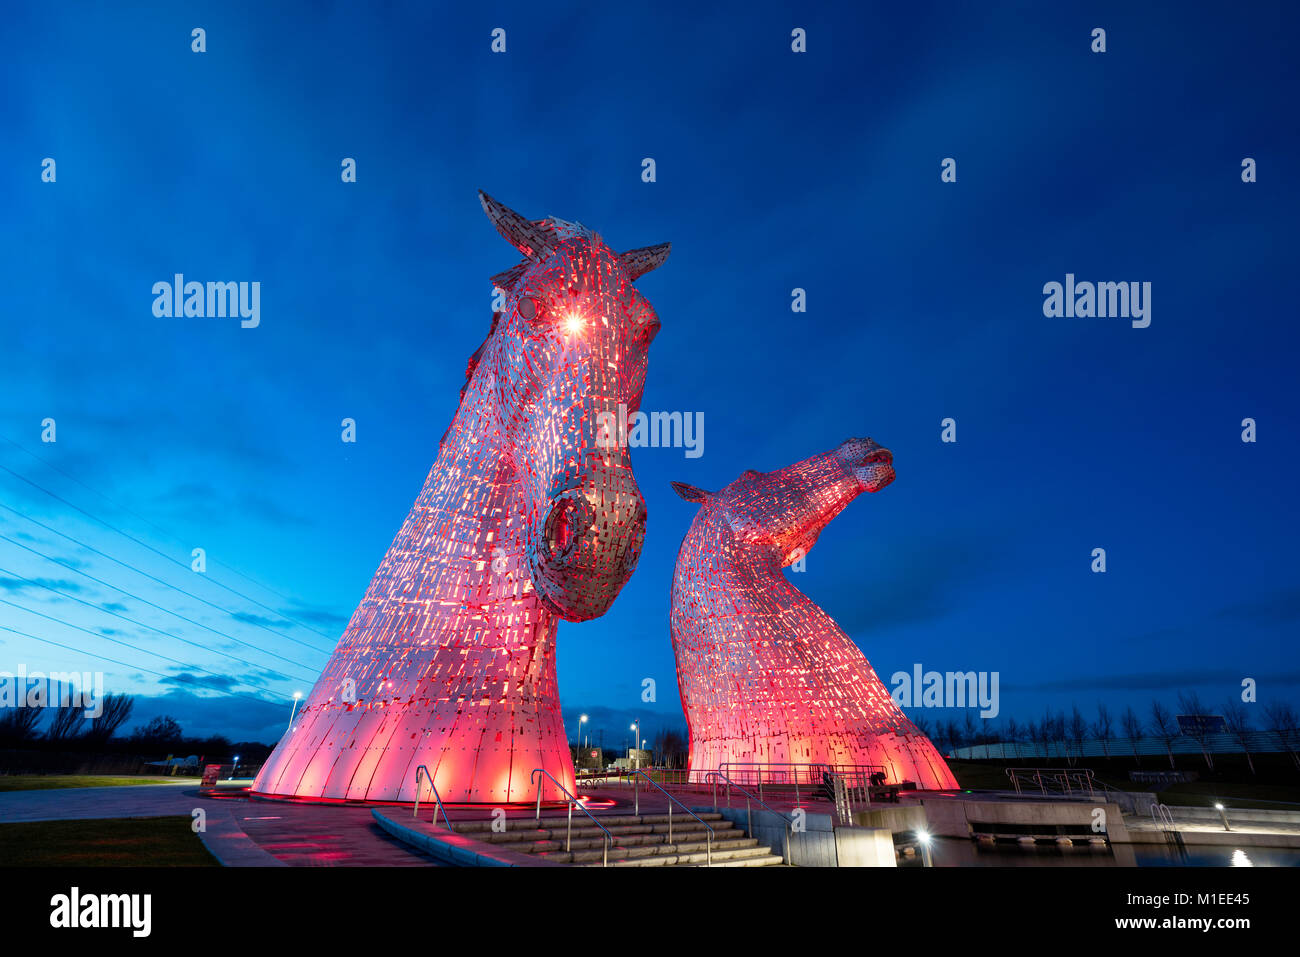 Night view of The Kelpies , large sculptures of horses, at Helix Park in Falkirk, Scotland, united Kingdom Stock Photo